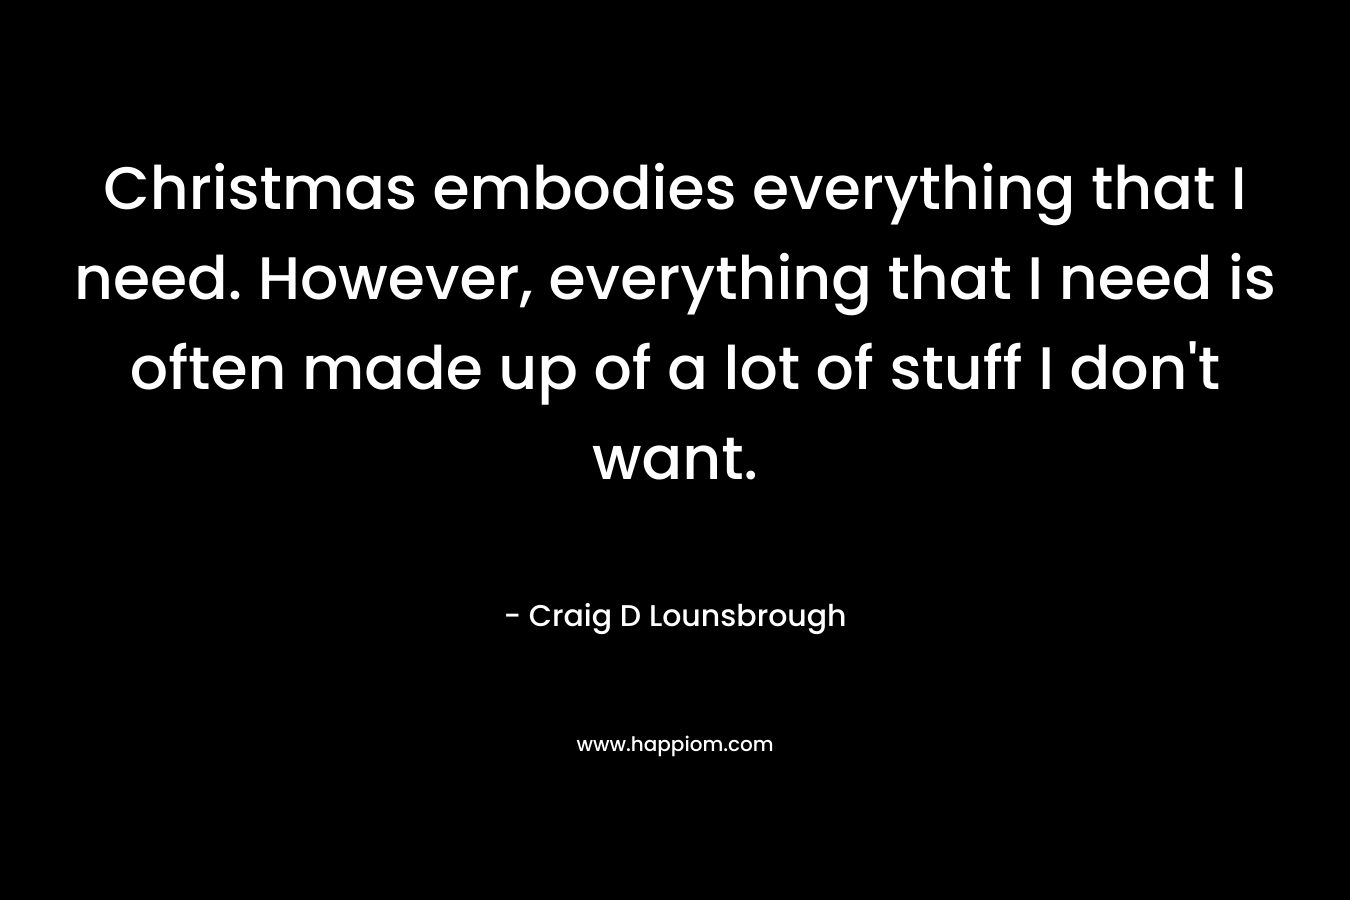 Christmas embodies everything that I need. However, everything that I need is often made up of a lot of stuff I don't want.